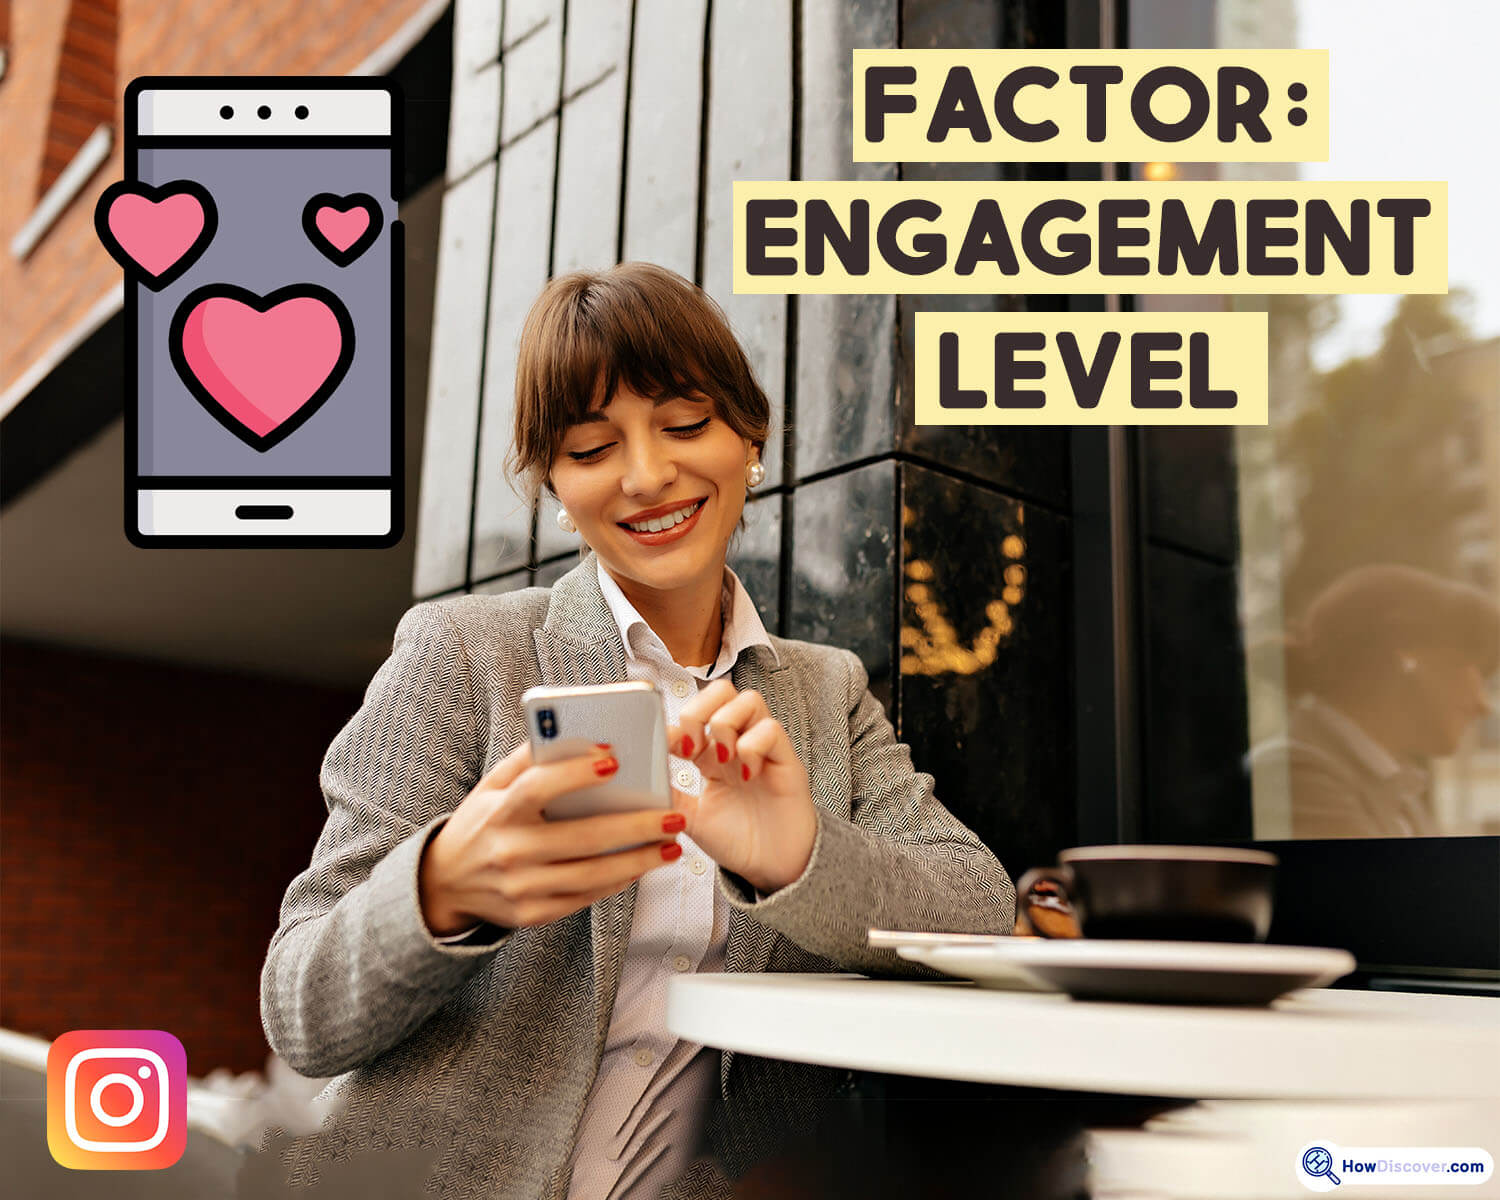 Engagement Level - Factors Influencing the Order of Instagram Story Viewers - How Does Instagram Sort Story Viewers